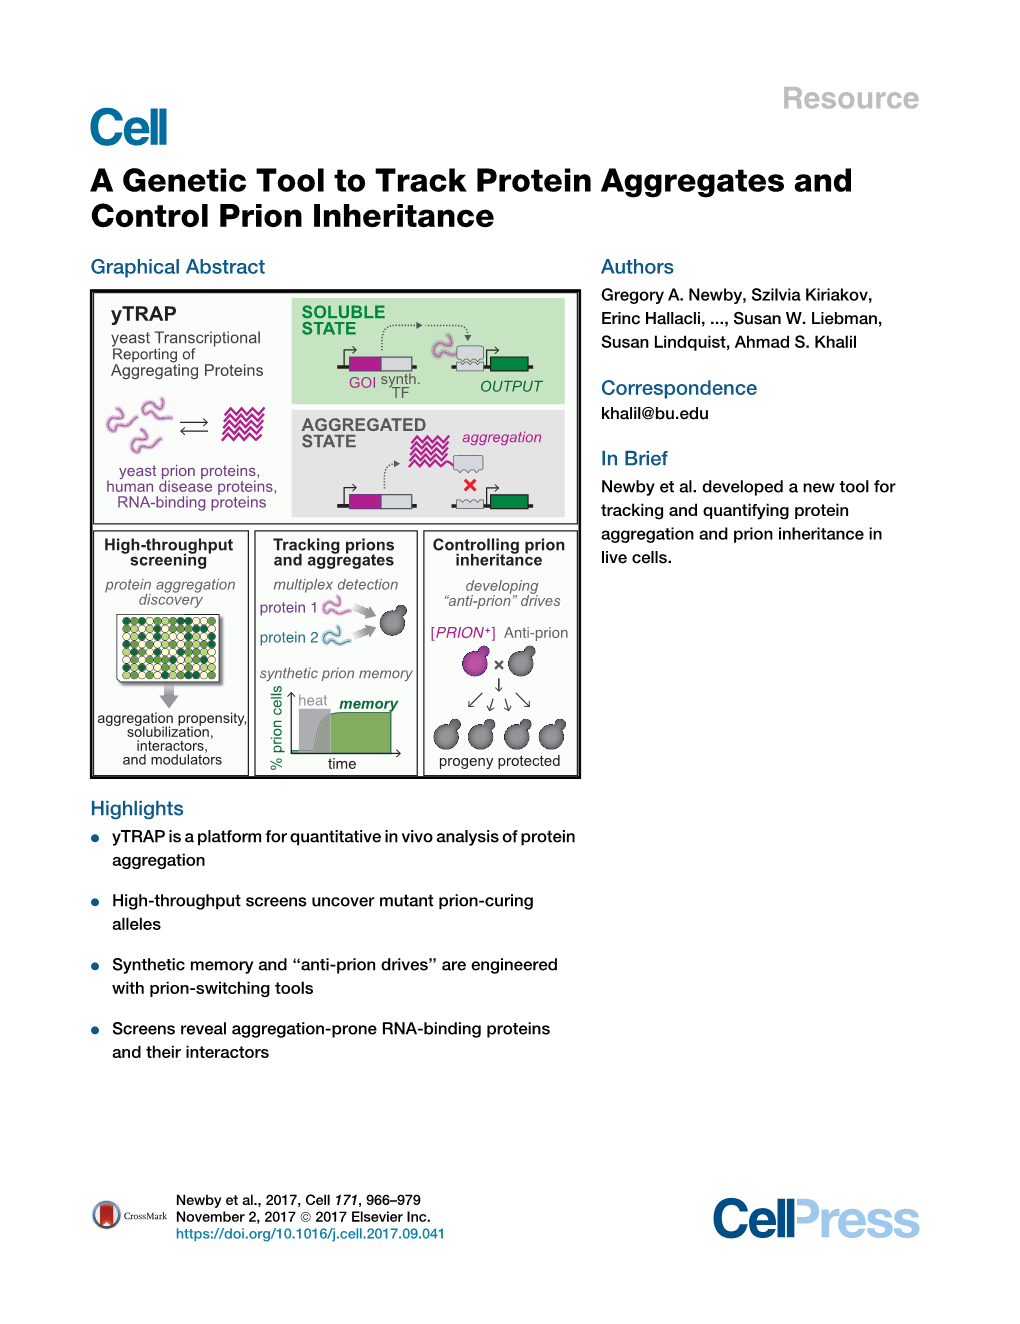 A Genetic Tool to Track Protein Aggregates and Control Prion Inheritance